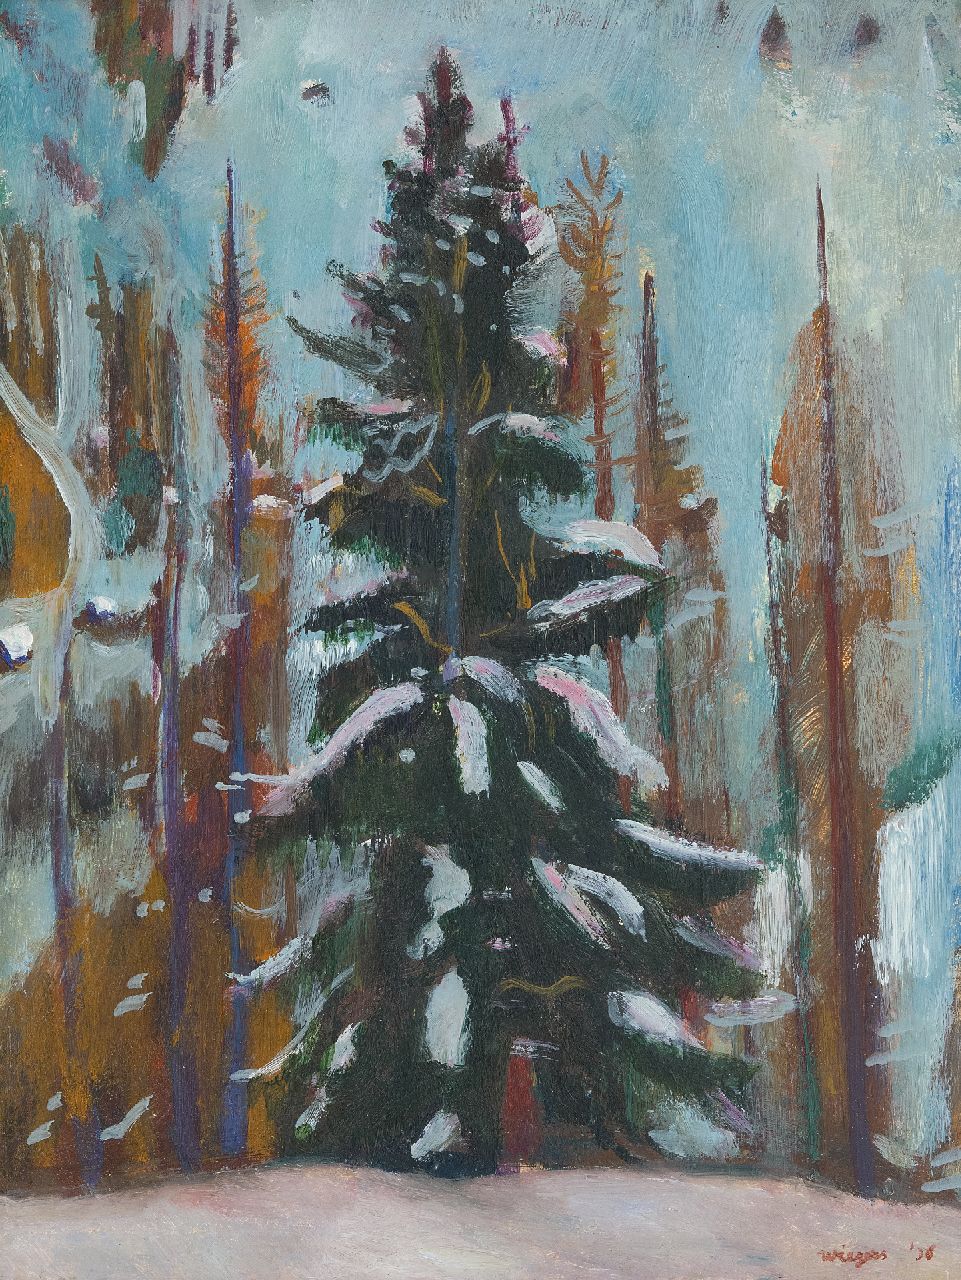 Wiegers J.  | Jan Wiegers, Fir, Frauenkirch (Davos), oil on panel 39.9 x 30.3 cm, signed l.r. and dated '36